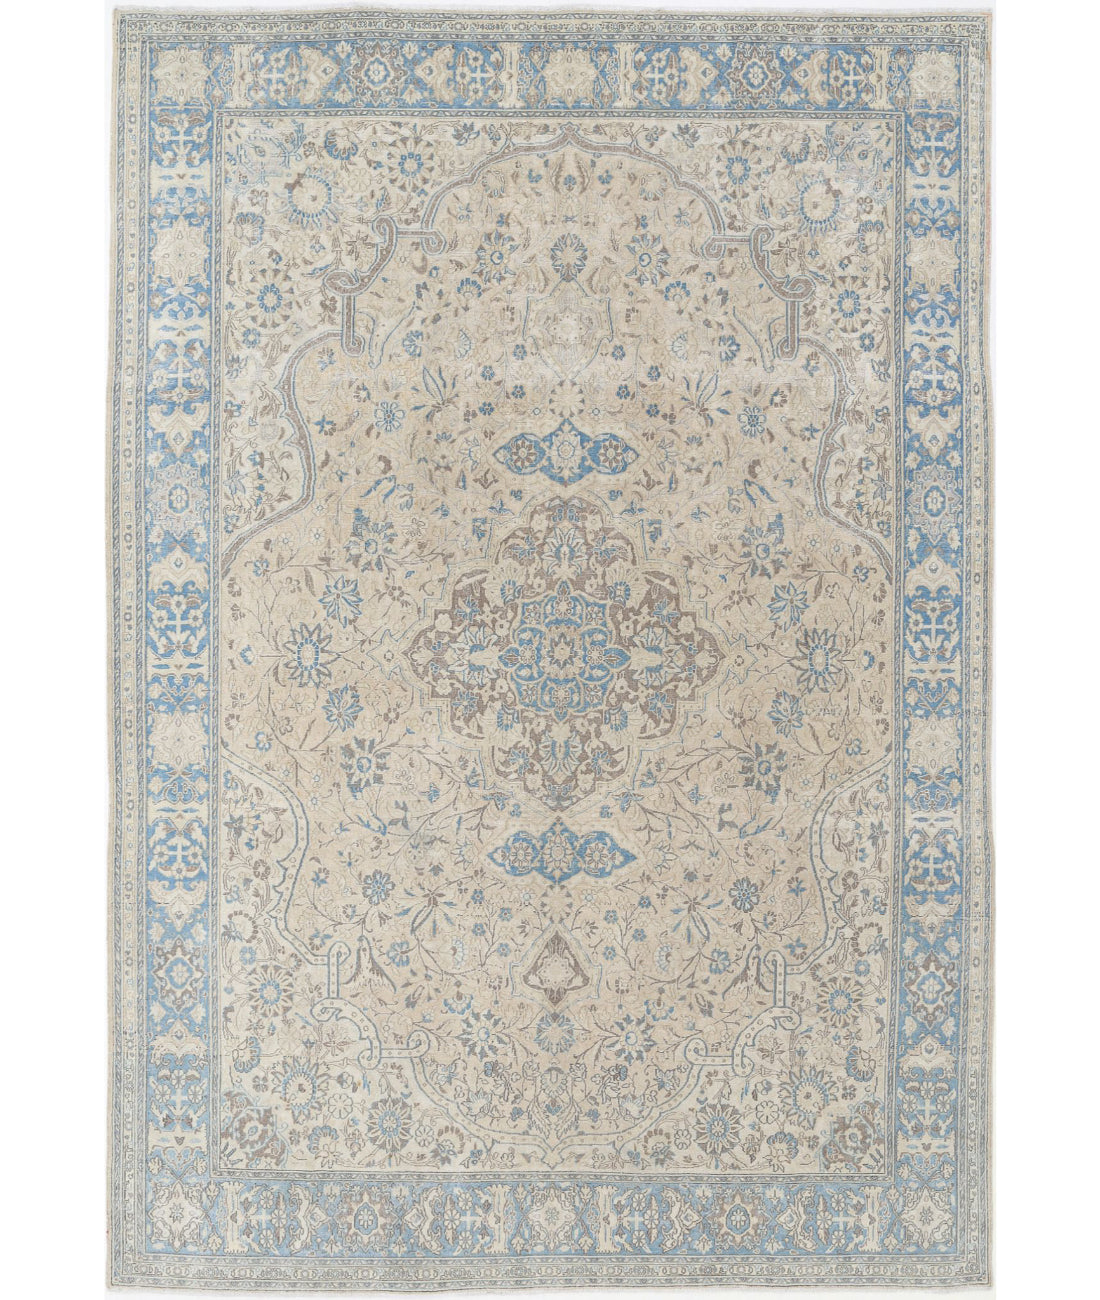 Hand Knotted Vintage Persian Nain Wool Rug - 7'8'' x 11'2'' 7'8'' x 11'2'' (230 X 335) / Taupe / Blue